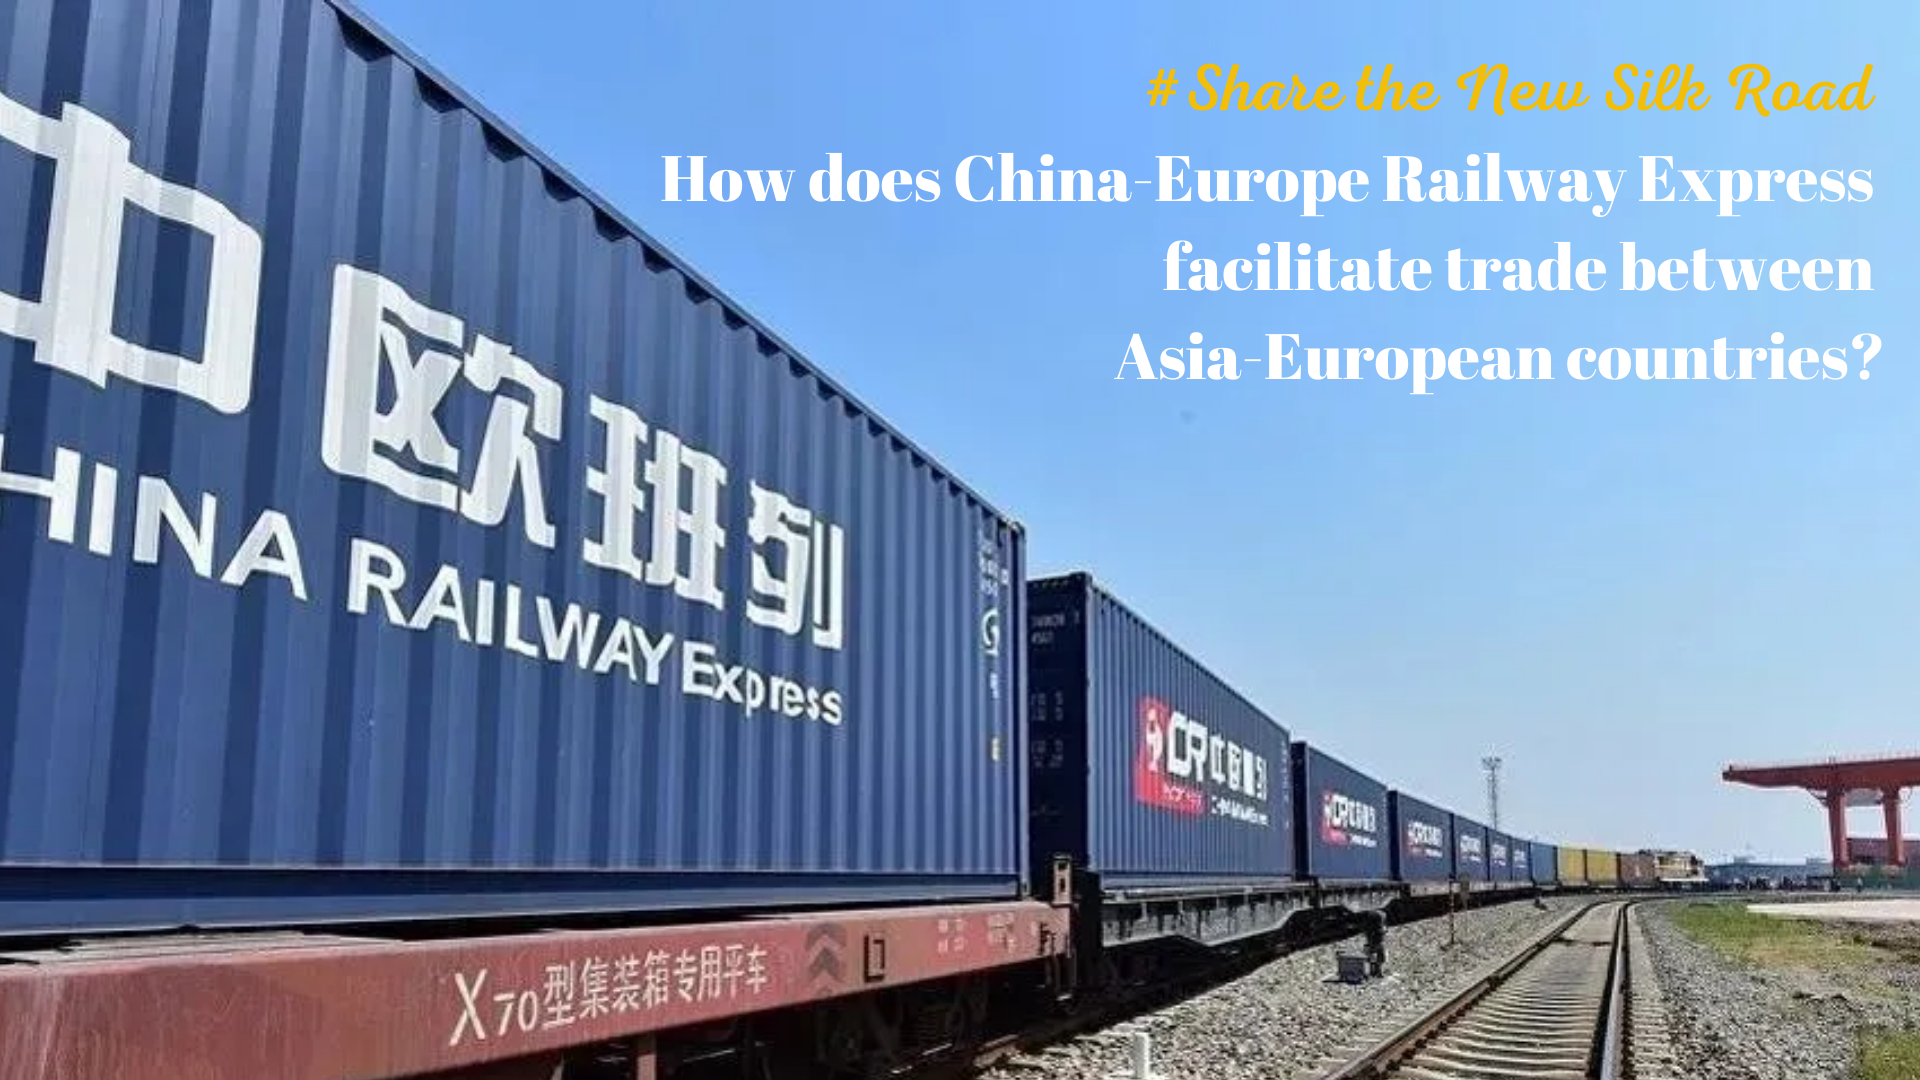 How does China-Europe Railway Express facilitate trade between Asia-European countries?